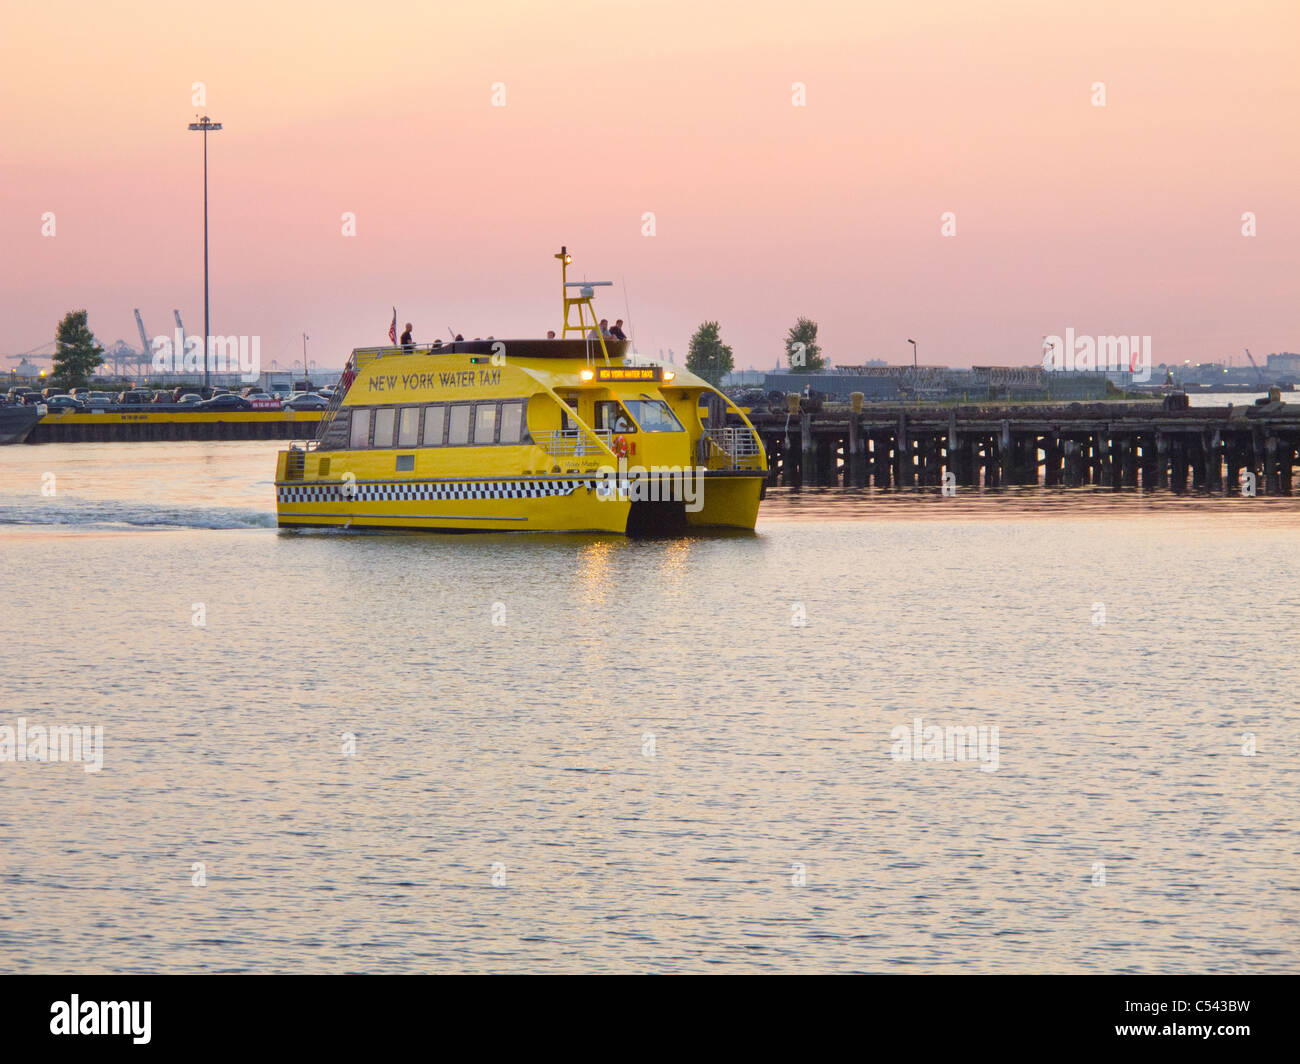 Water taxi at Ikea store dock Stock Photo - Alamy